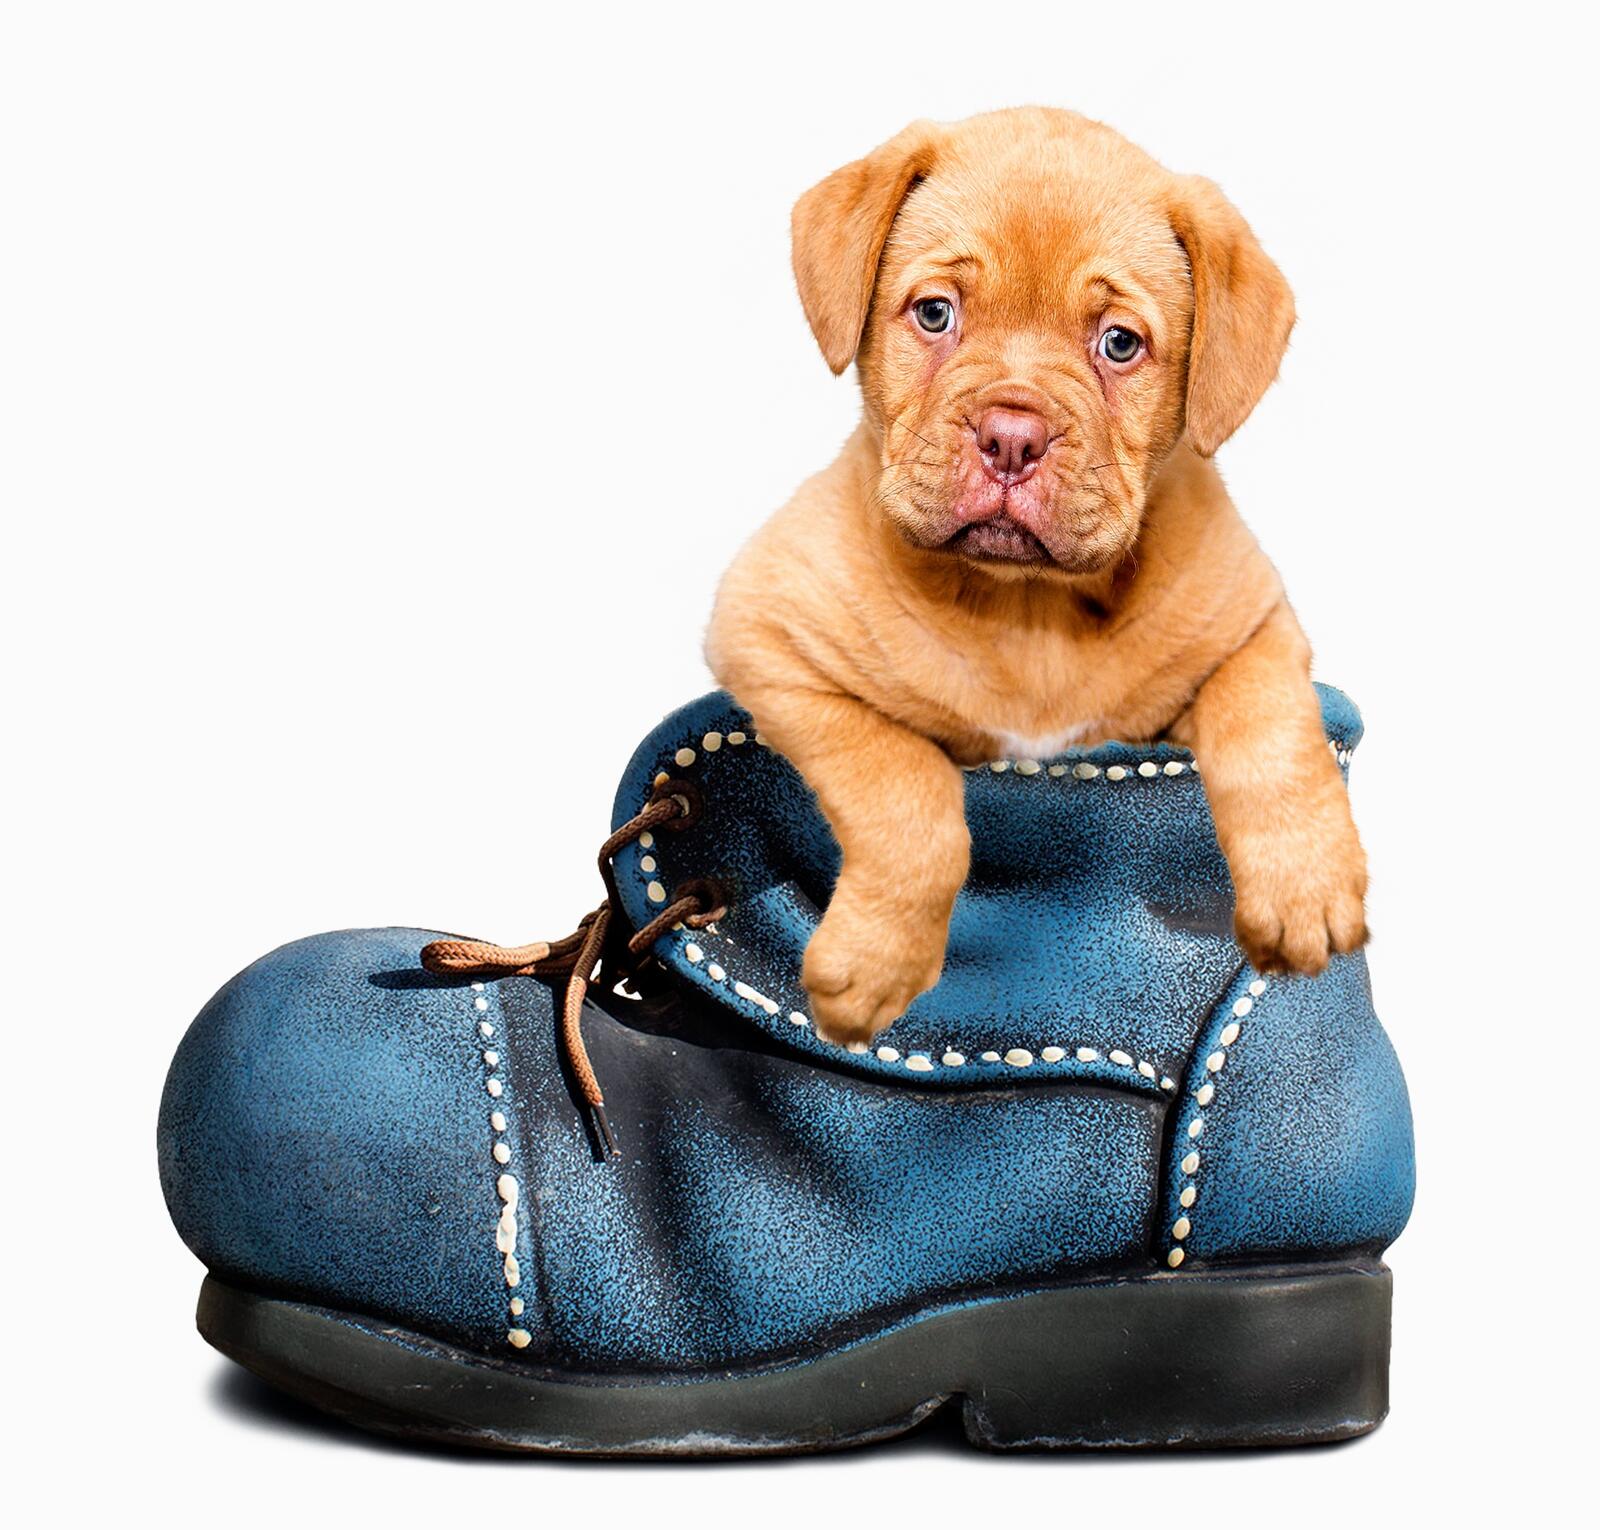 Free photo A lop-eared puppy in a boot.